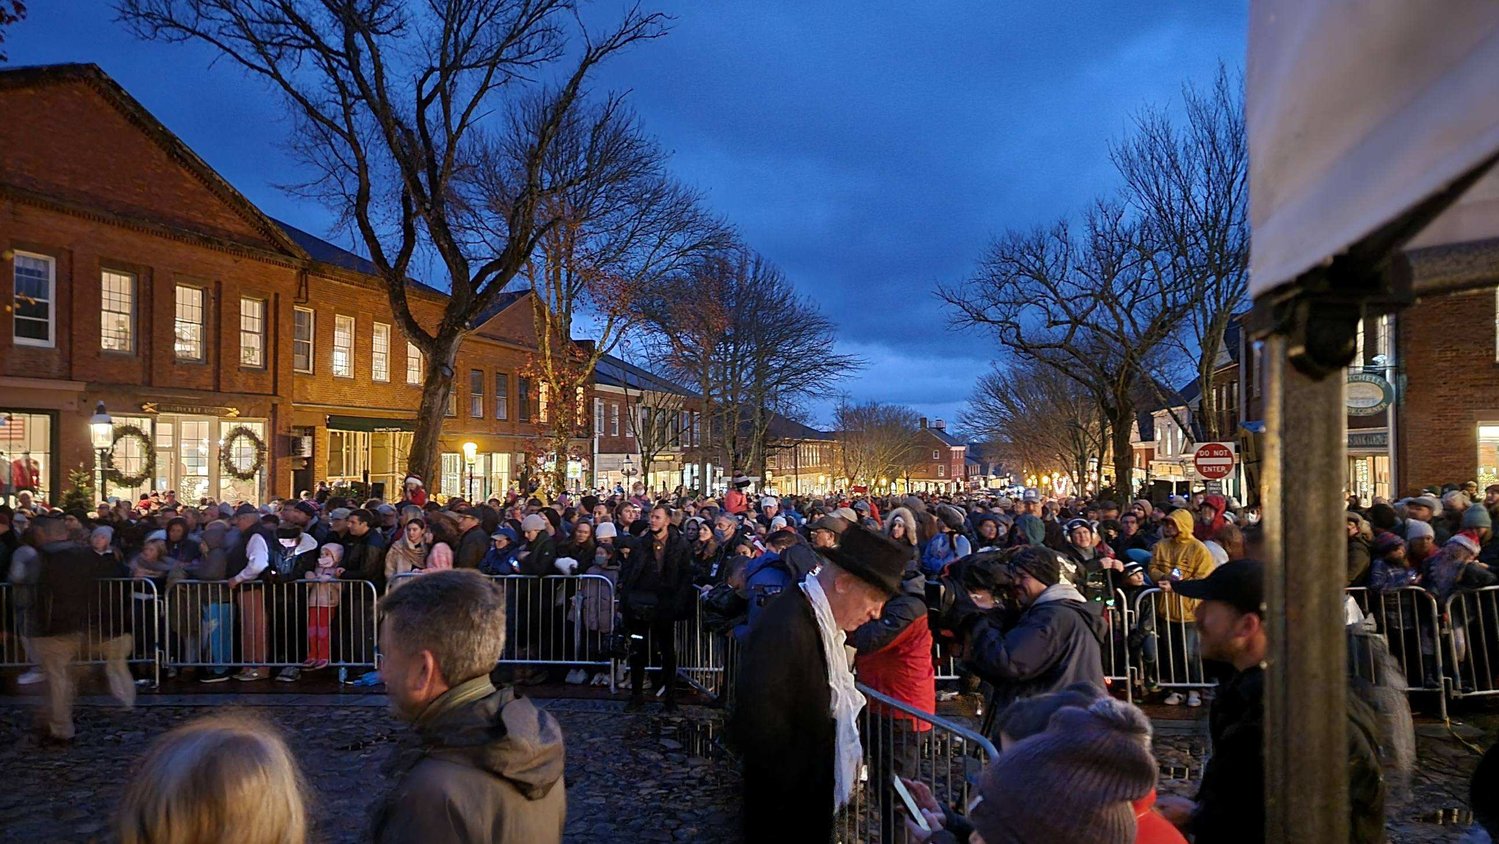 The crowd fills Main Street before the trees are lit.